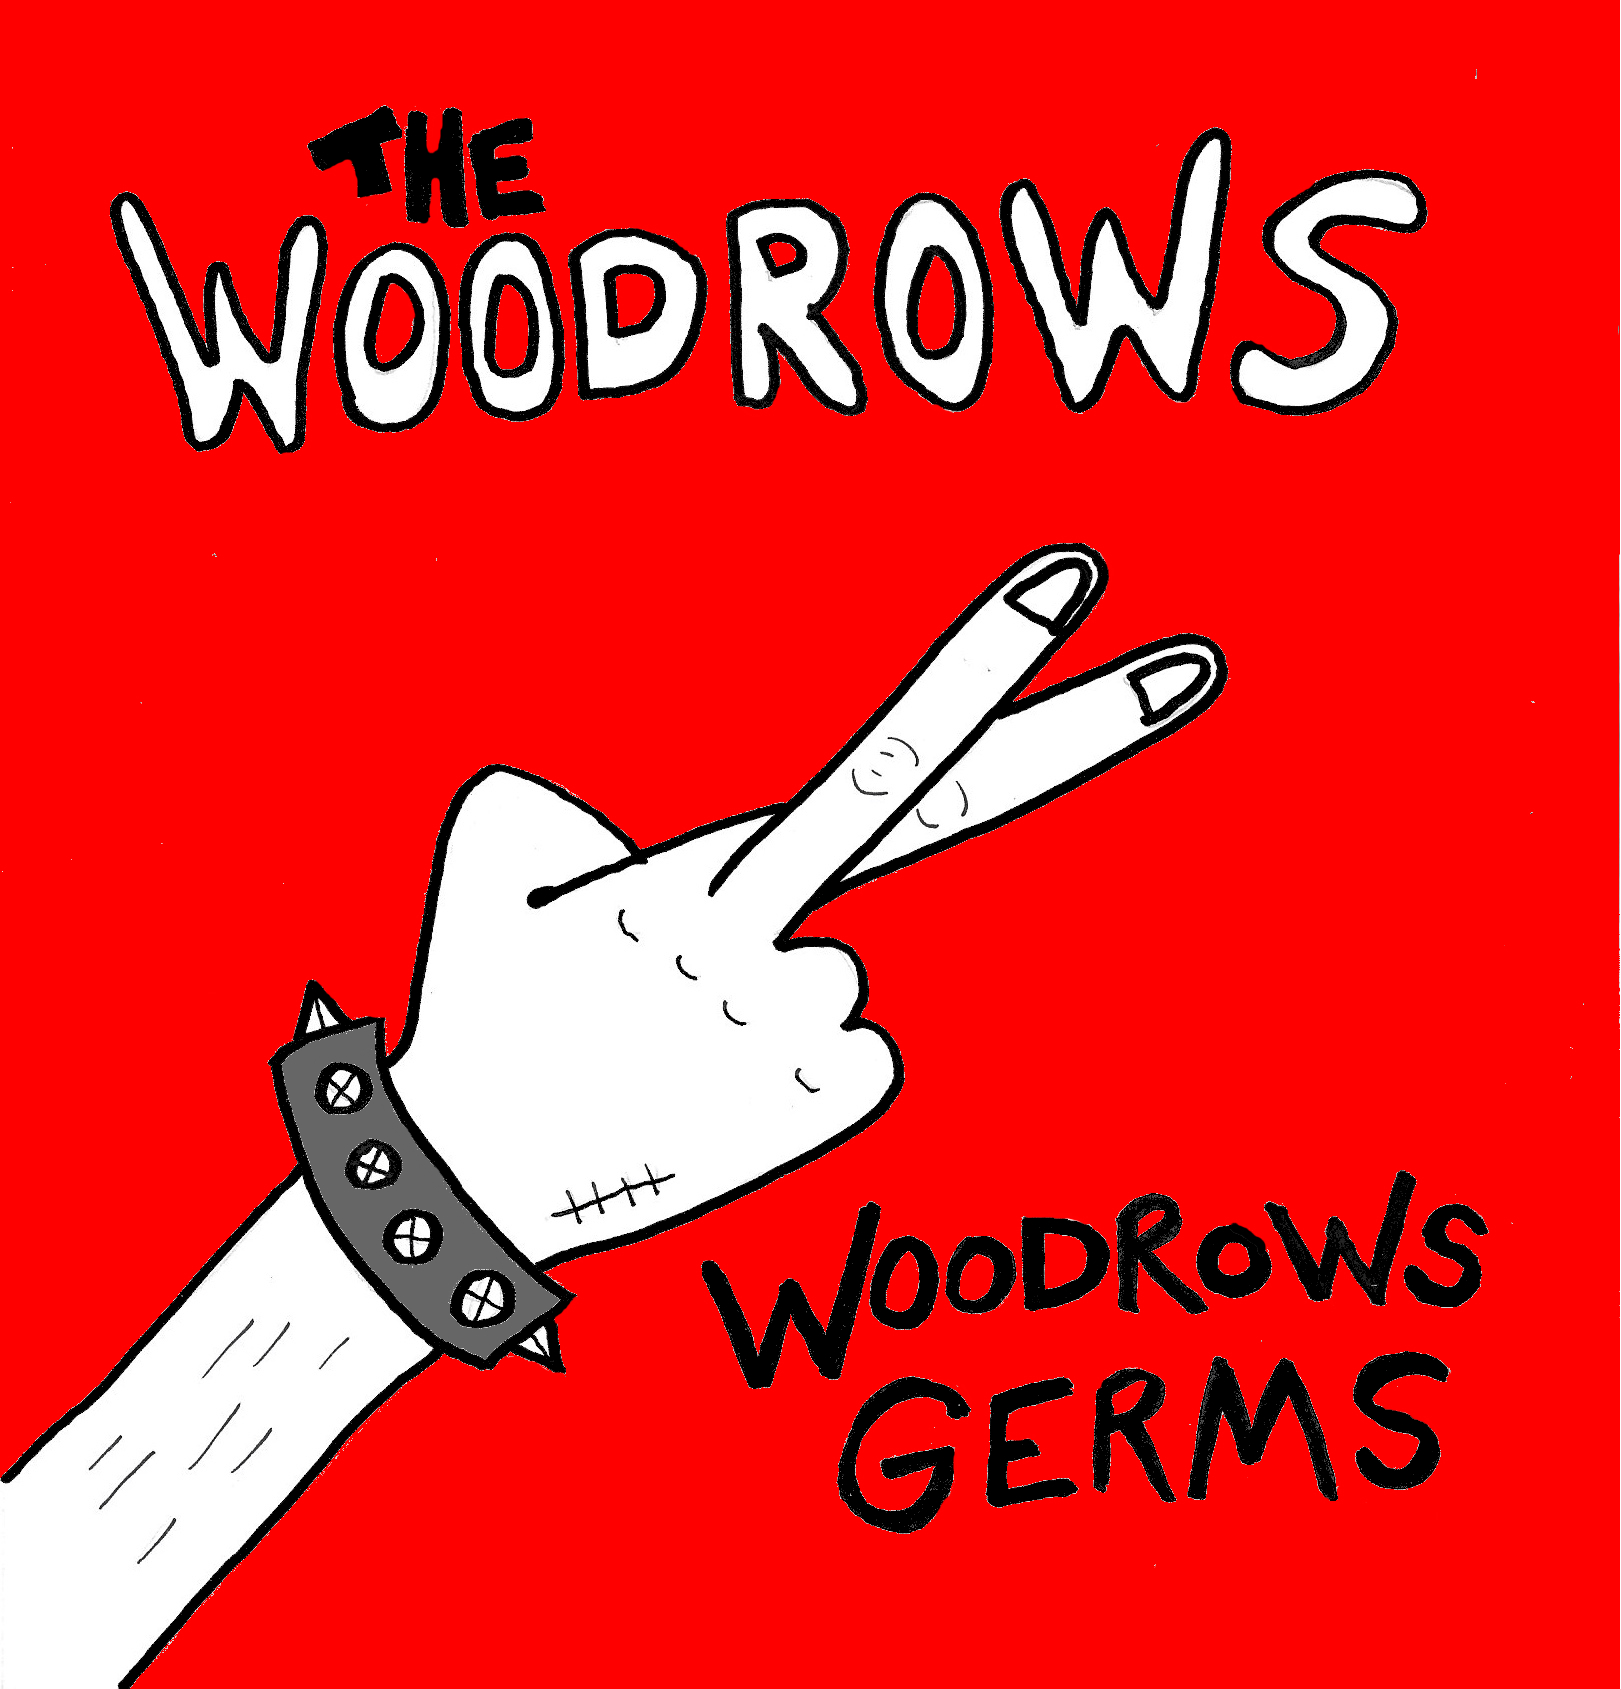 Woodrows Germs